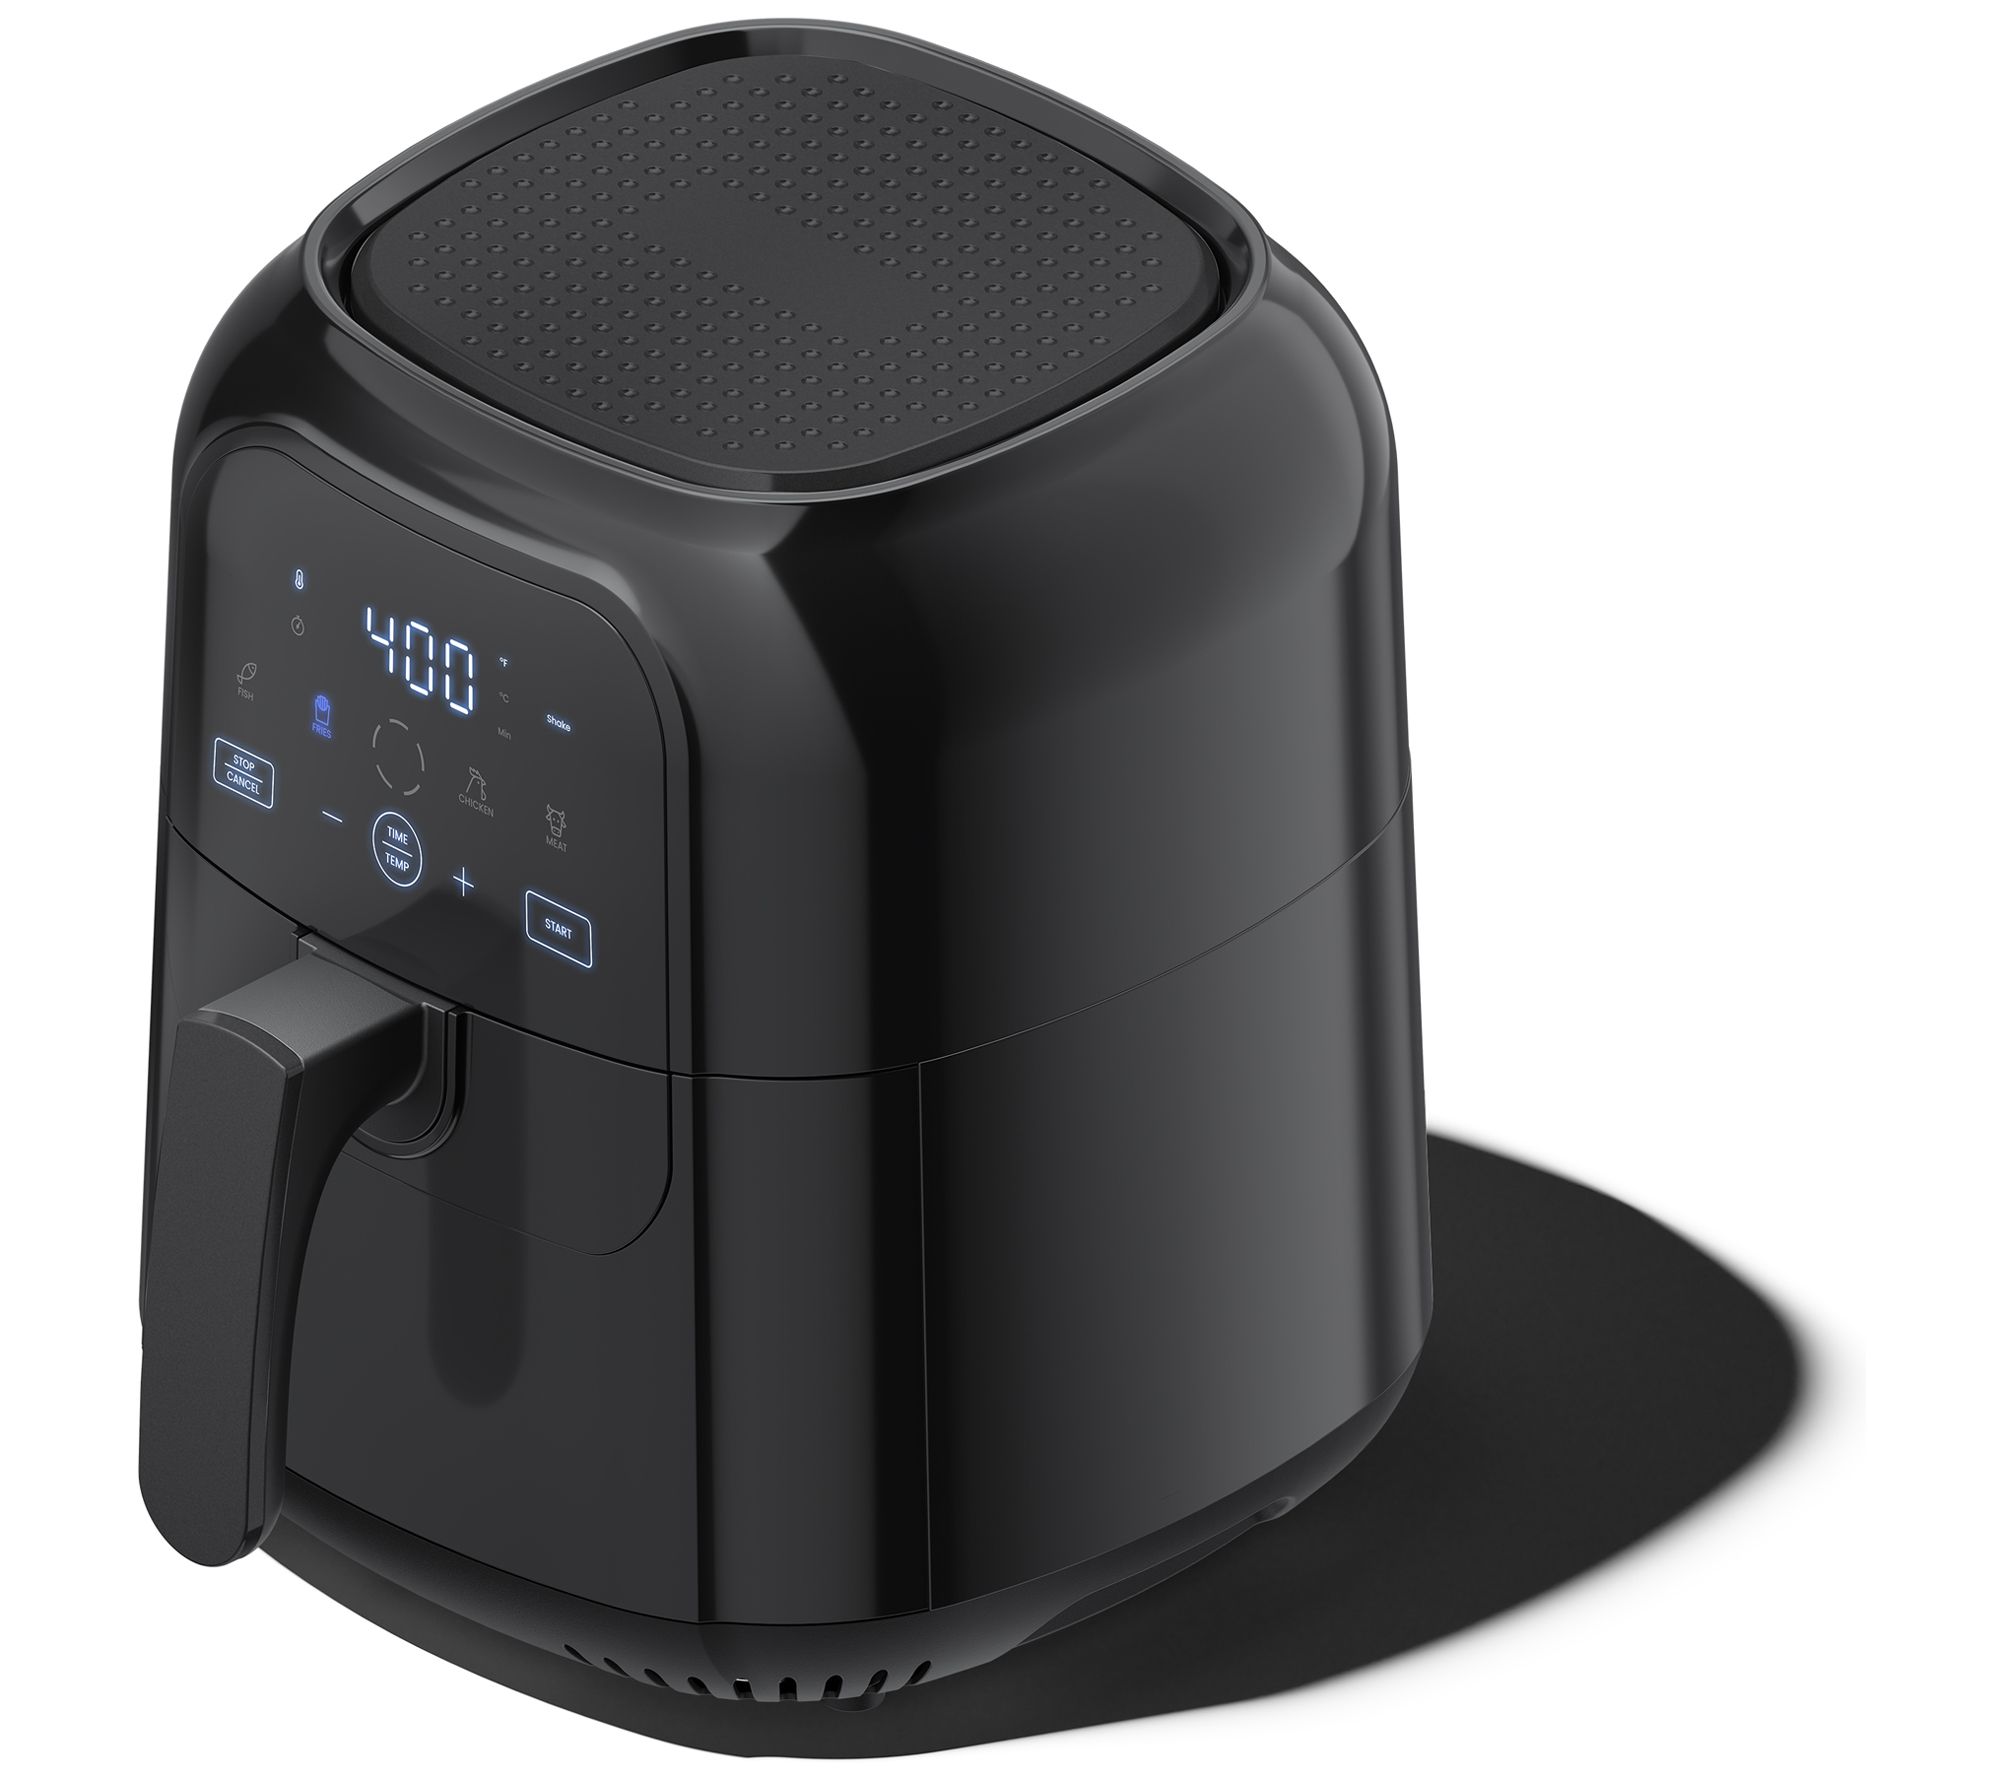 Chefman TurboFry Touch 5 qt air fryer unboxing, overview test and